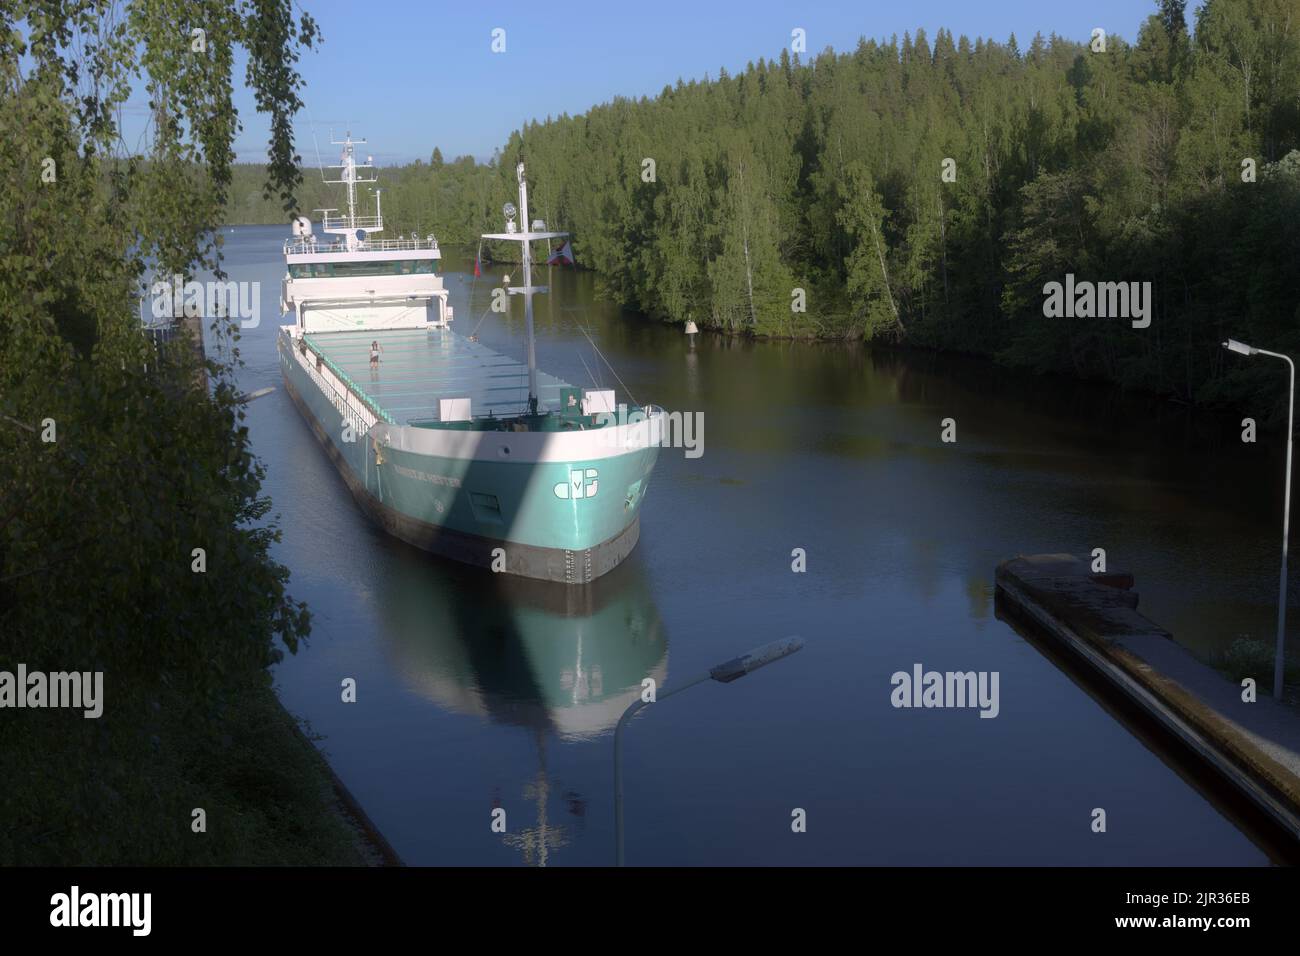 Cargo ship Marietje Hester pass the lock of Saimaa canal connecting Saimaa lake, Finland with Gulf of Finland of Baltic sea at Vyborg, Russia Stock Photo